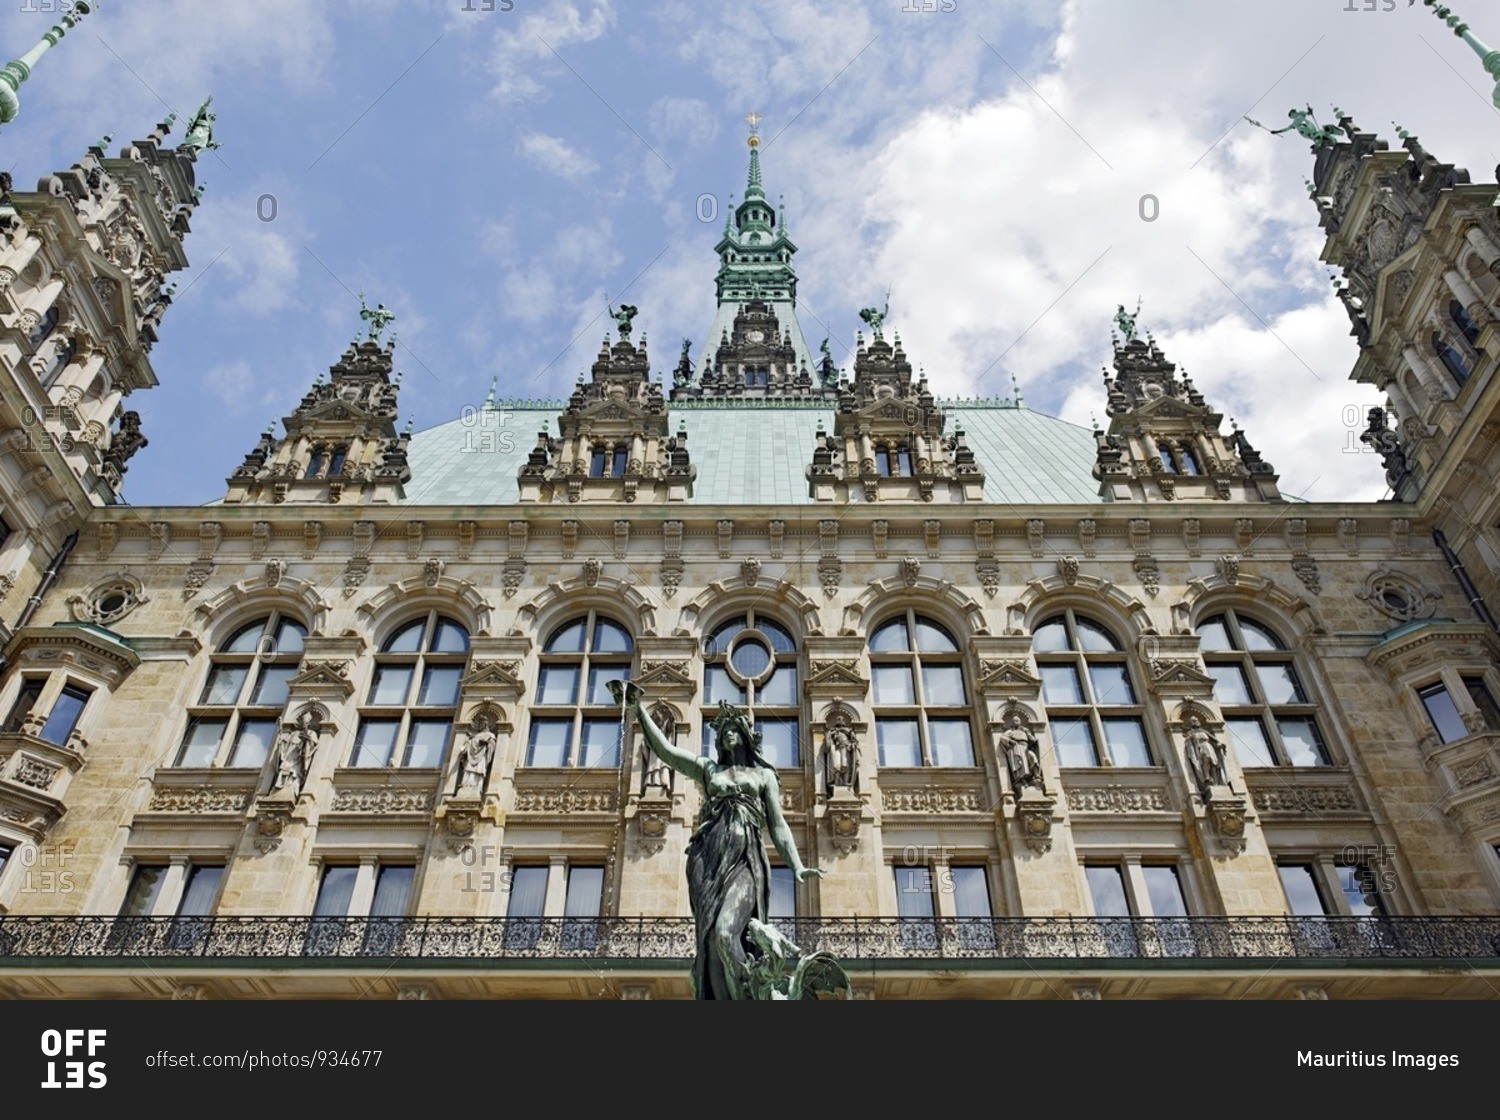 The historic Hygieia fountain in the courtyard of the town
hall, Hamburg, Germany stock photo - OFFSET